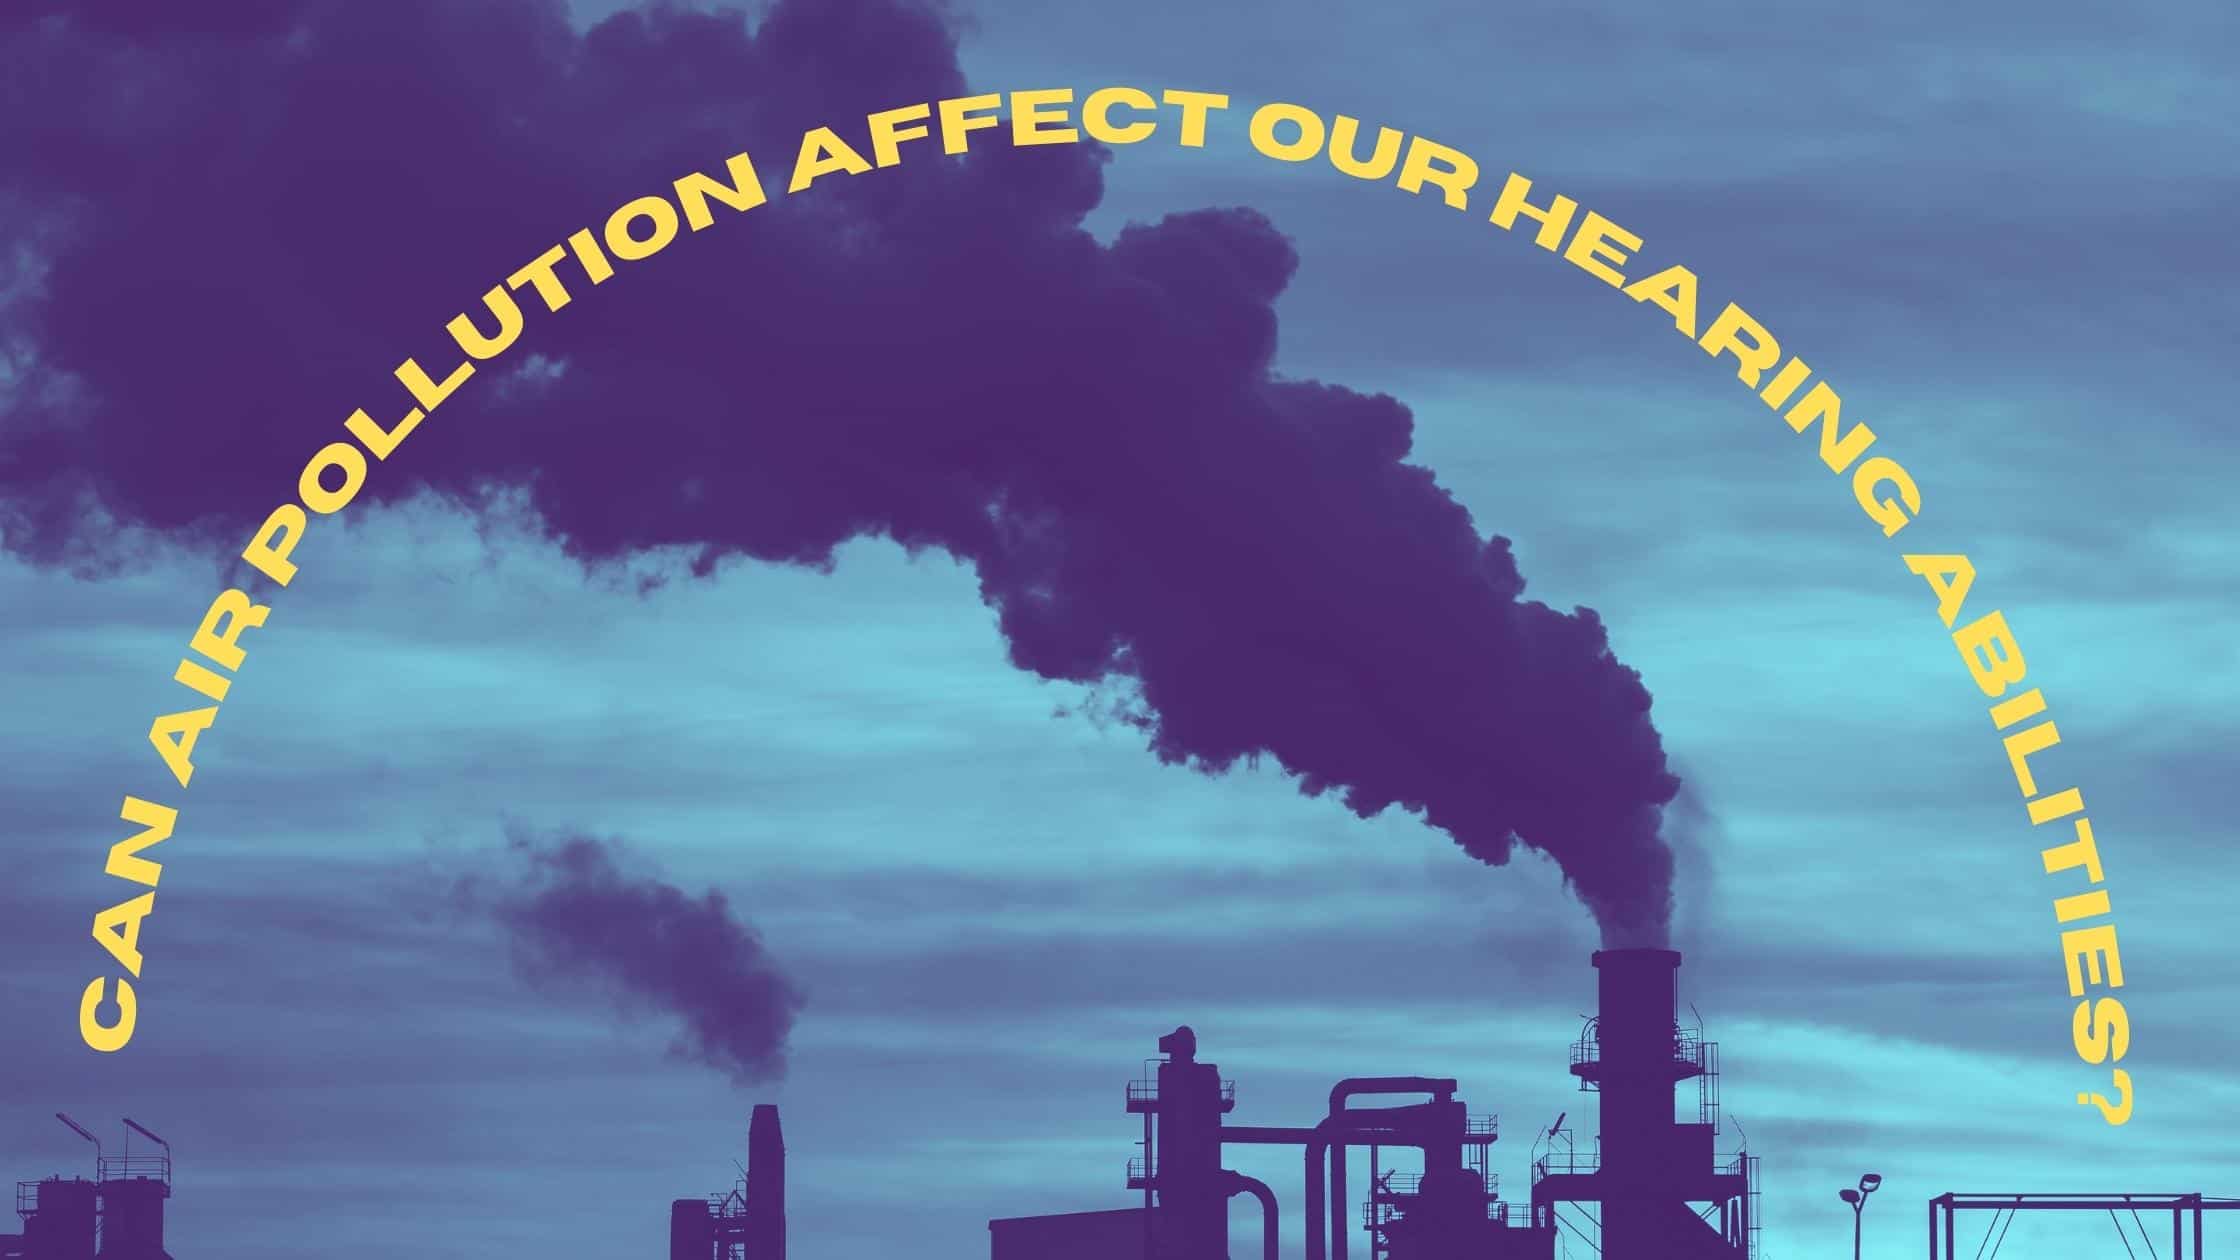 Can Air Pollution Affect Our Hearing Abilities